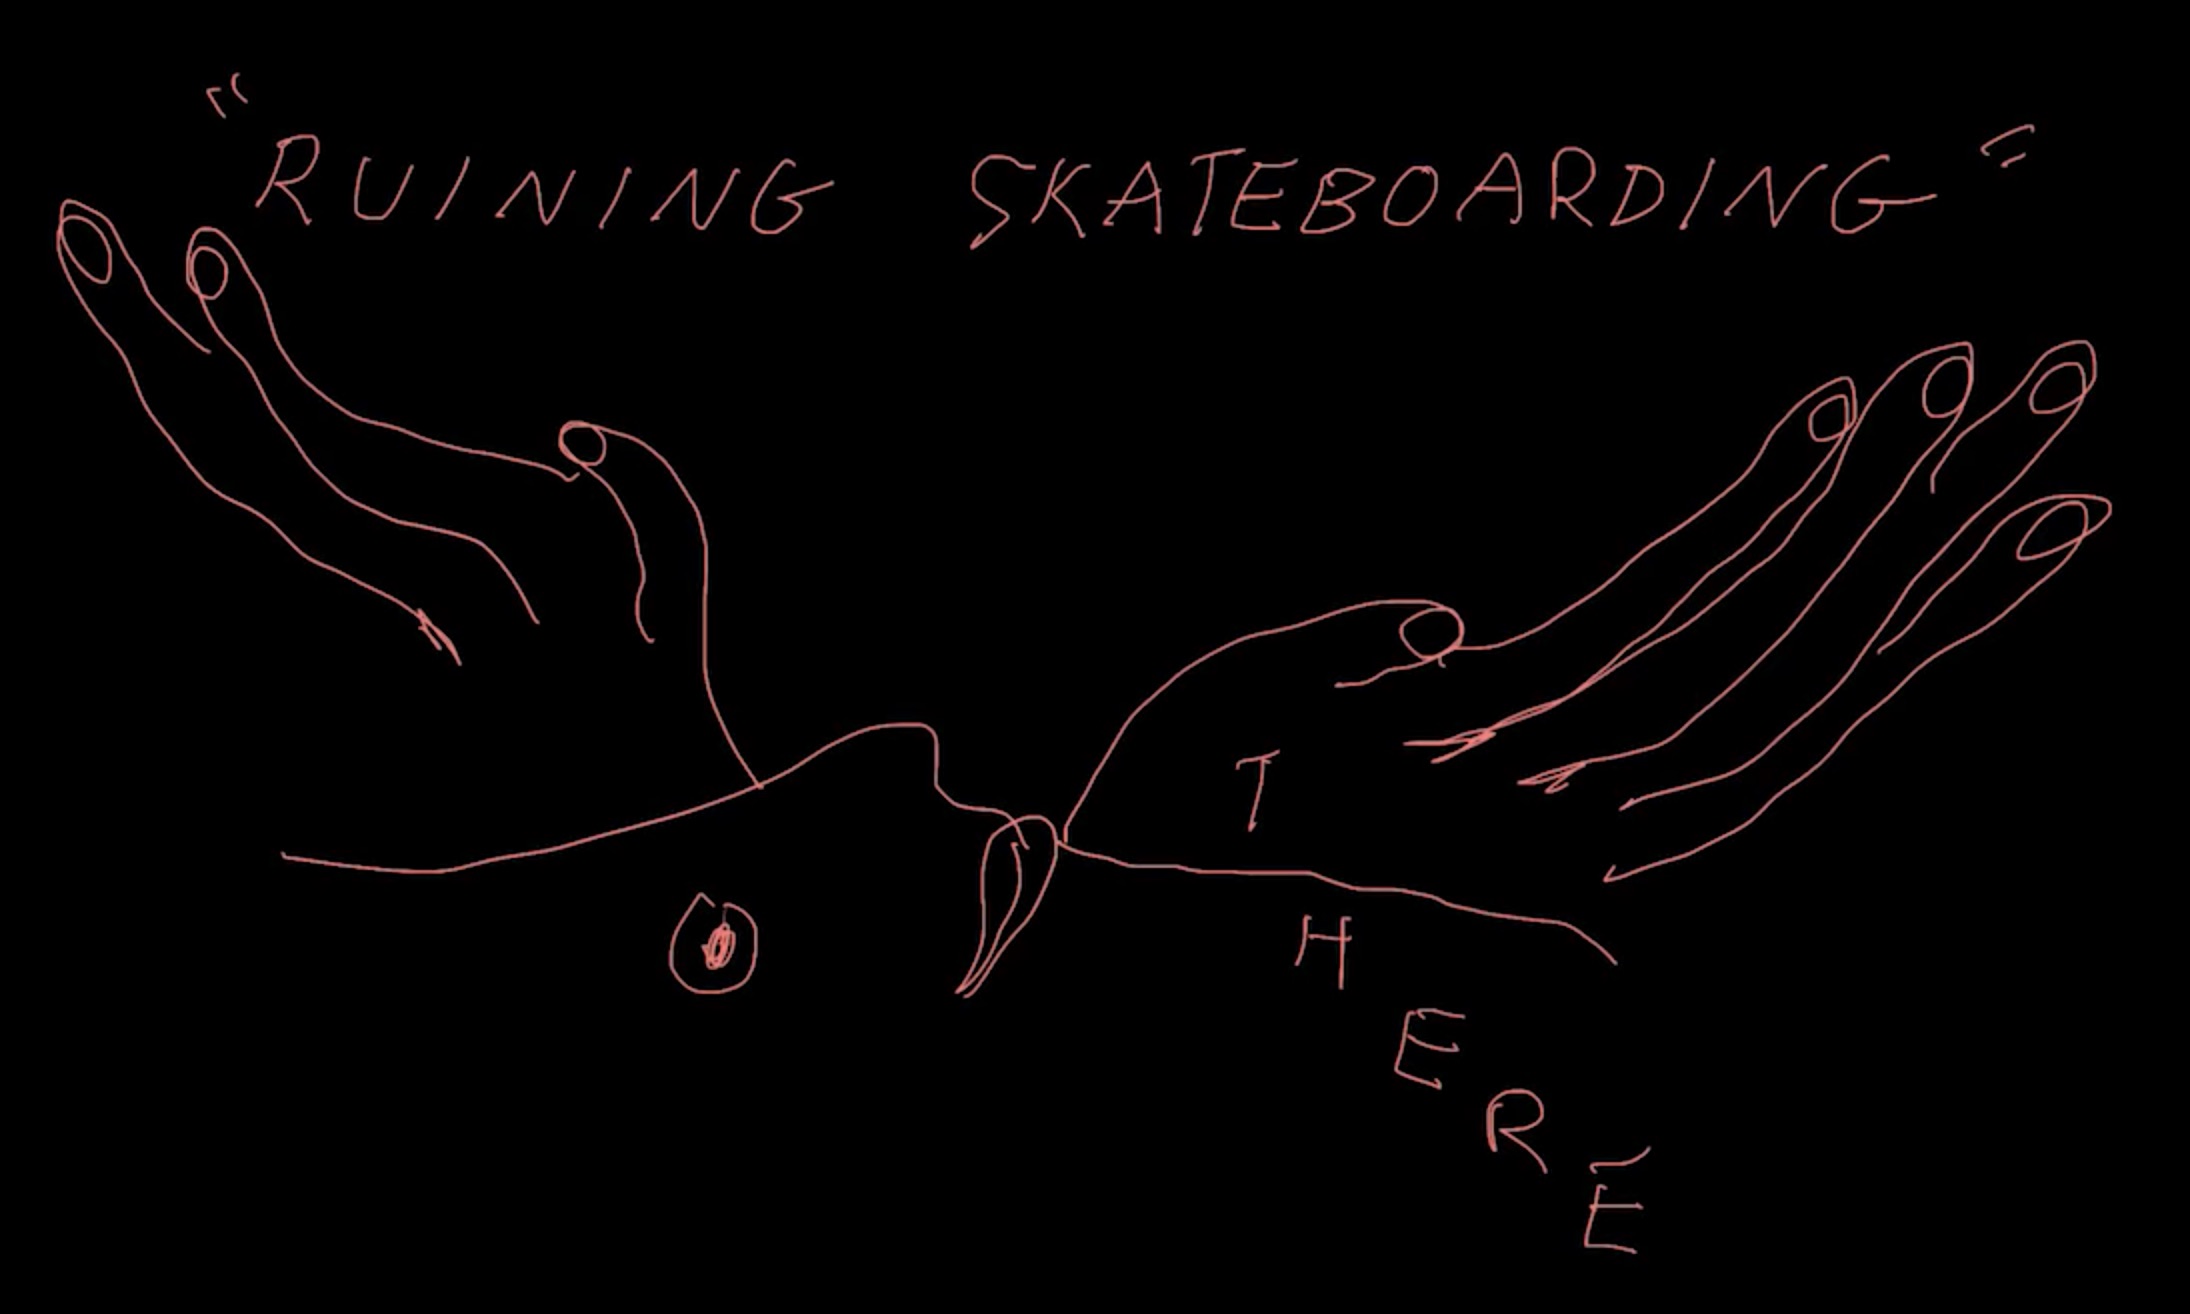 THERE - "Ruining Skateboarding" cover